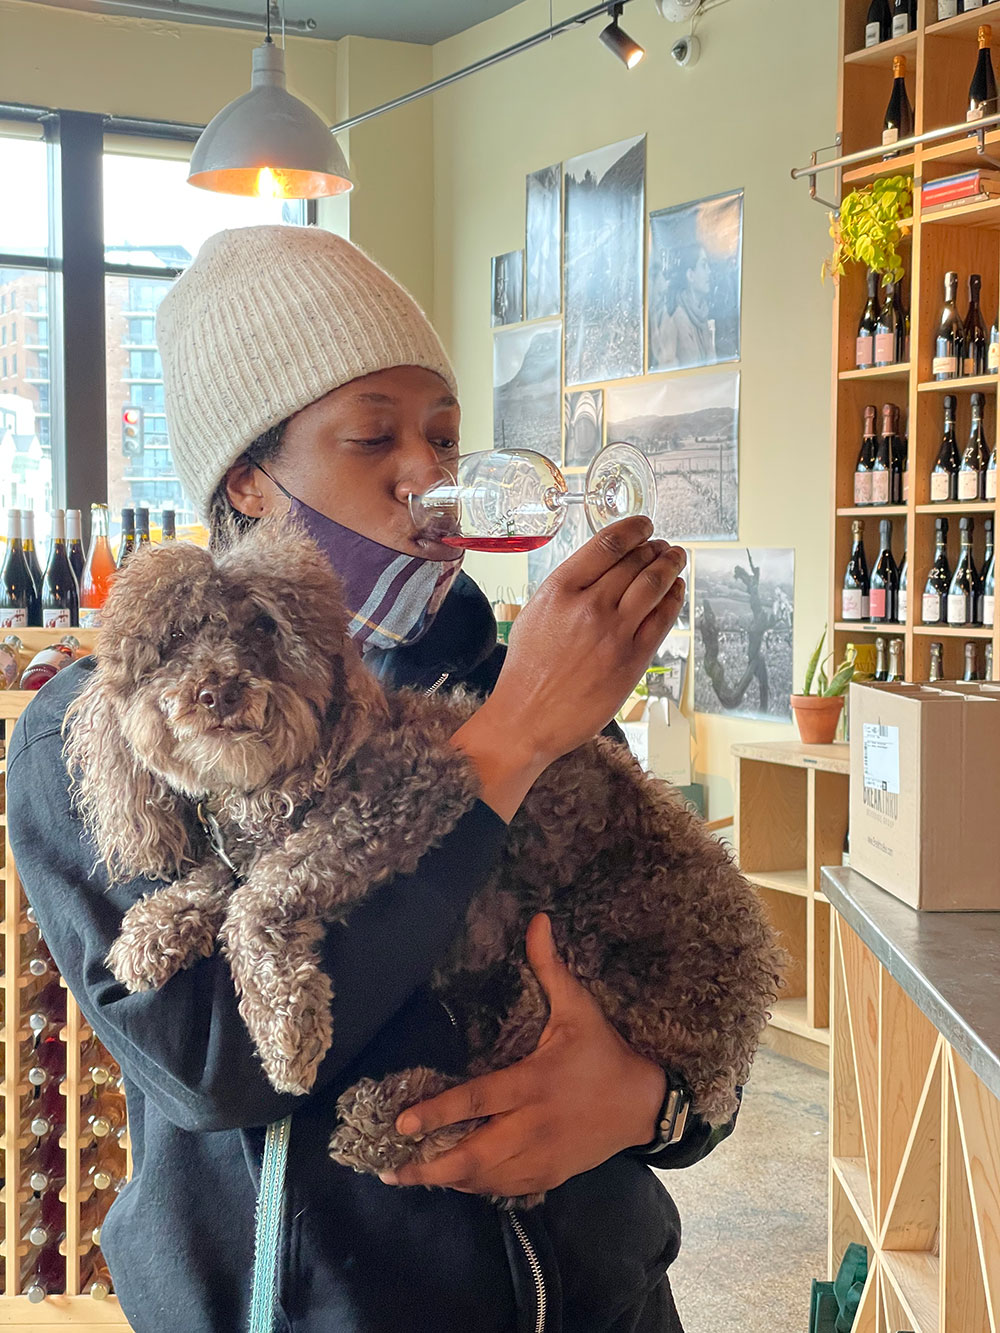 Eric Moorer drinks red wine out of a glass while he holds a small furry brown dog. Eric is standing in a store surrounded by shelves of wine.